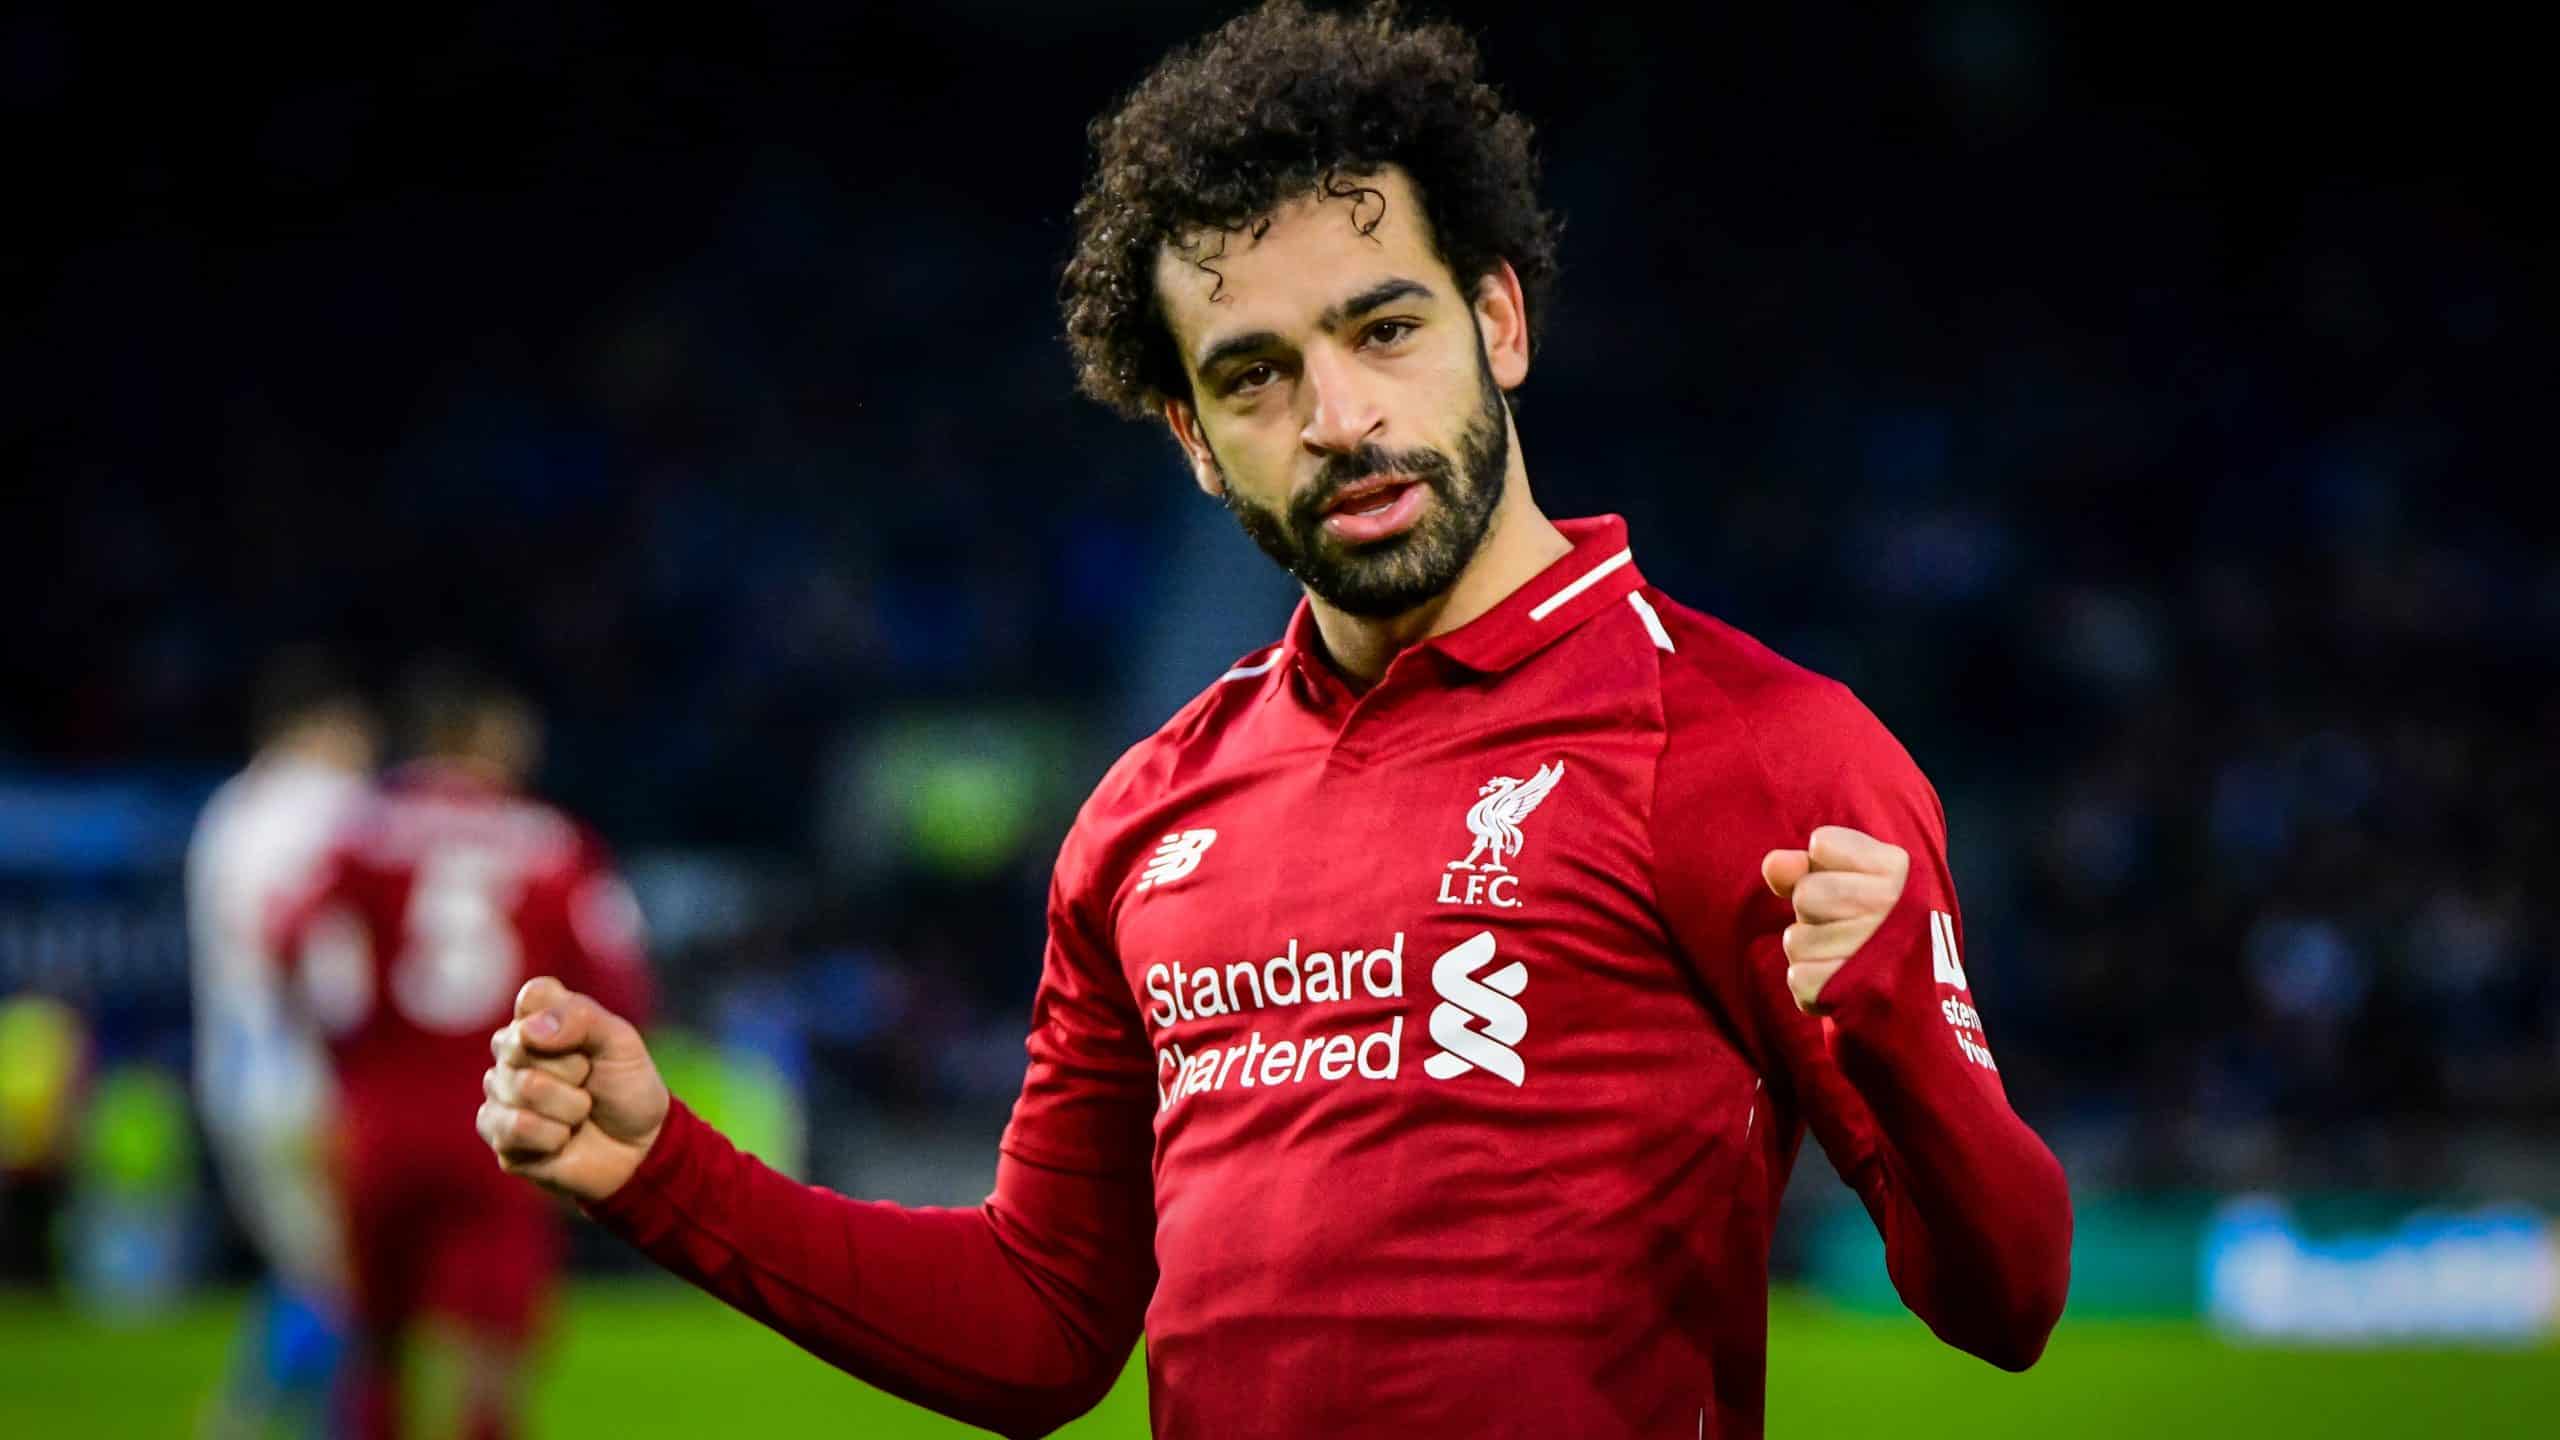 Mo Salah in the jersey of his club Liverpool FC